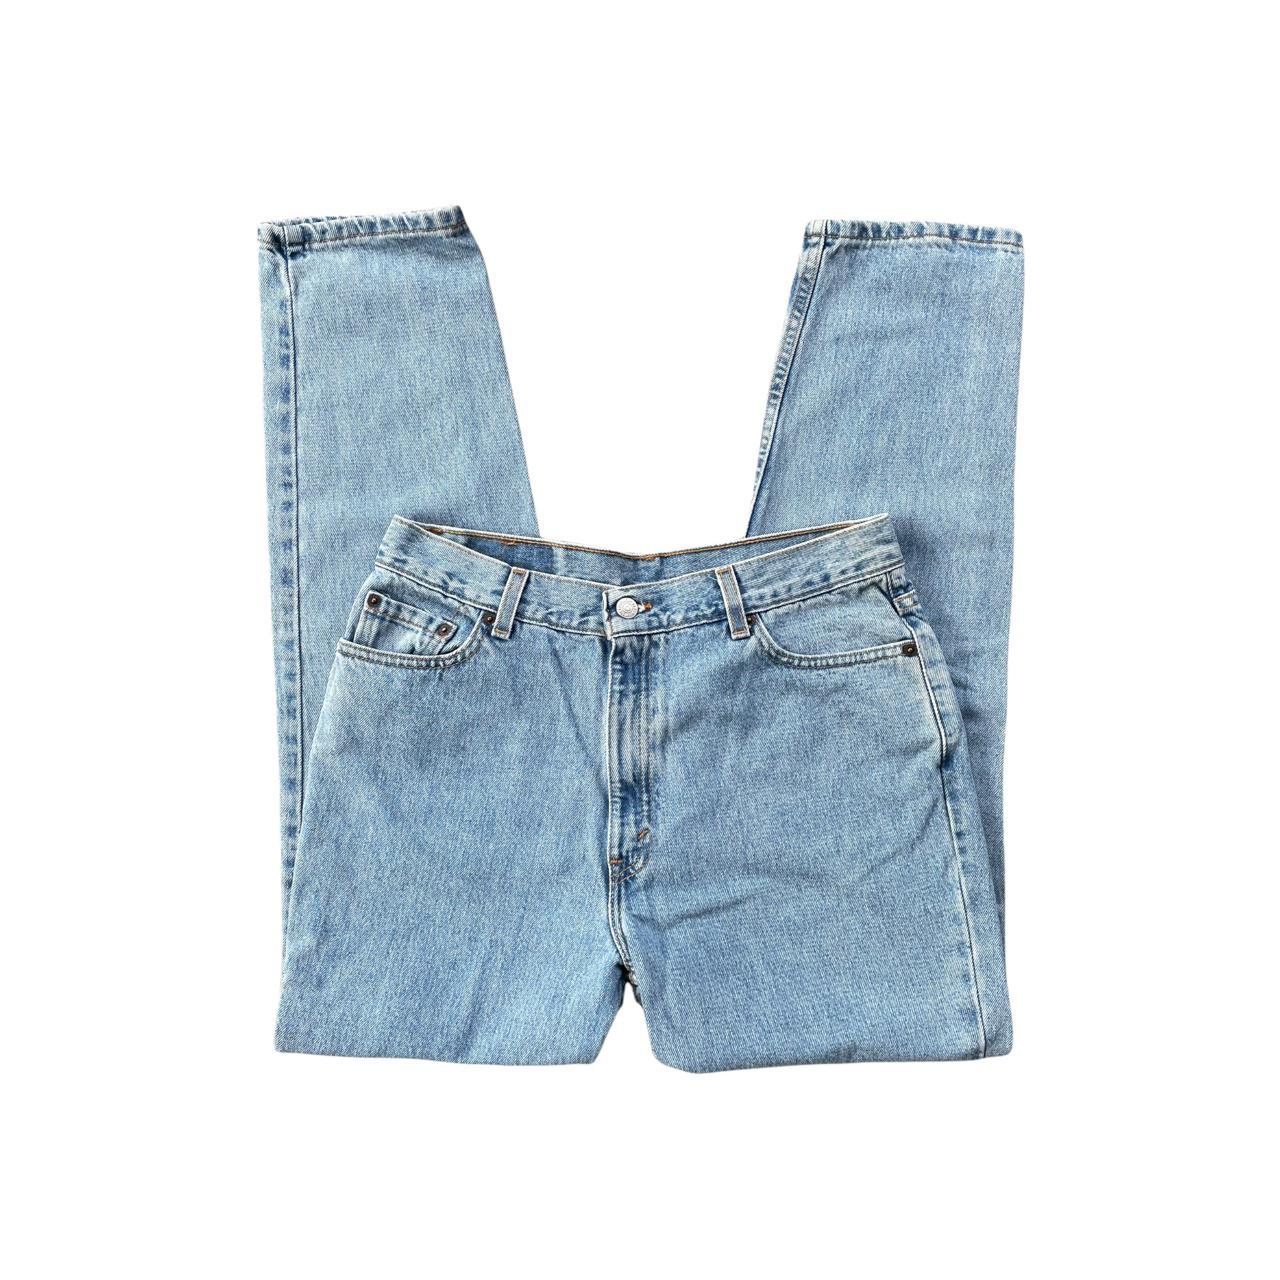 Product Image 2 - Vintage Levi’s 512 High Waisted